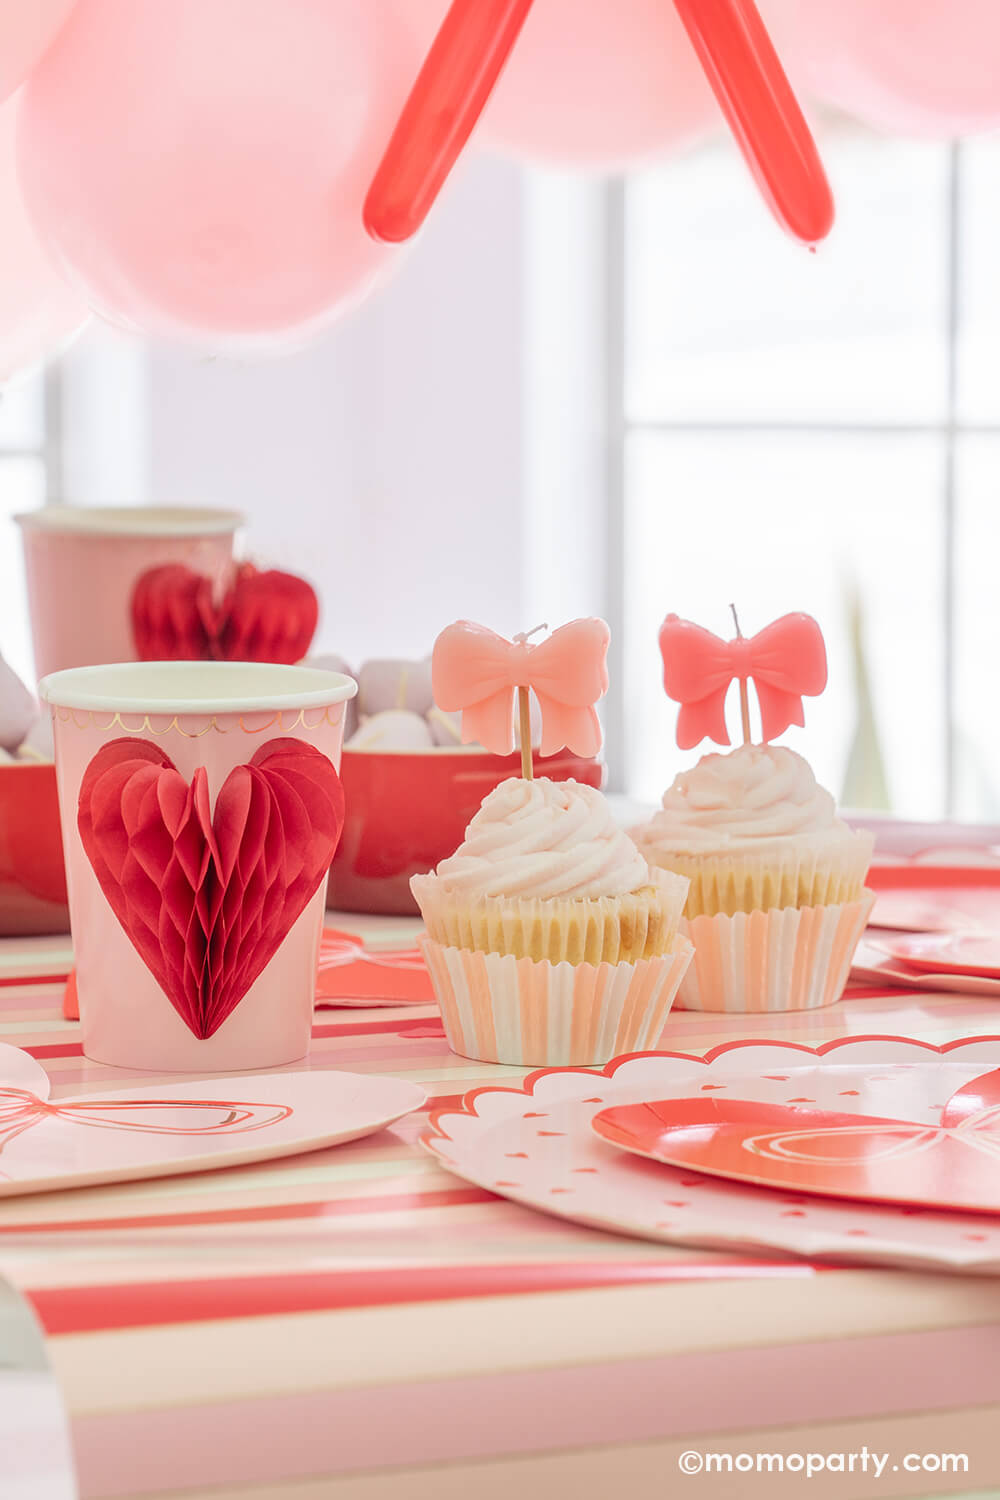 A close-up detail of Momo Party's sweet Pink and Red Bow-Themed Valentine's Day Party table. Highlighting Meri Meri Honeycomb Heart Cups, these cups feature charming 3D honeycomb red hearts on pink paper, adorned with gold foil details. Accompanied by a Pink Bow Candles atop a cupcakes and sweets in the red Mini Cocotte, with a flower vase behind them. All elegantly arranged on a red-striped paper runner. Such a cute idea for elevating your Valentine's celebration or Galentine's Day with your besties.